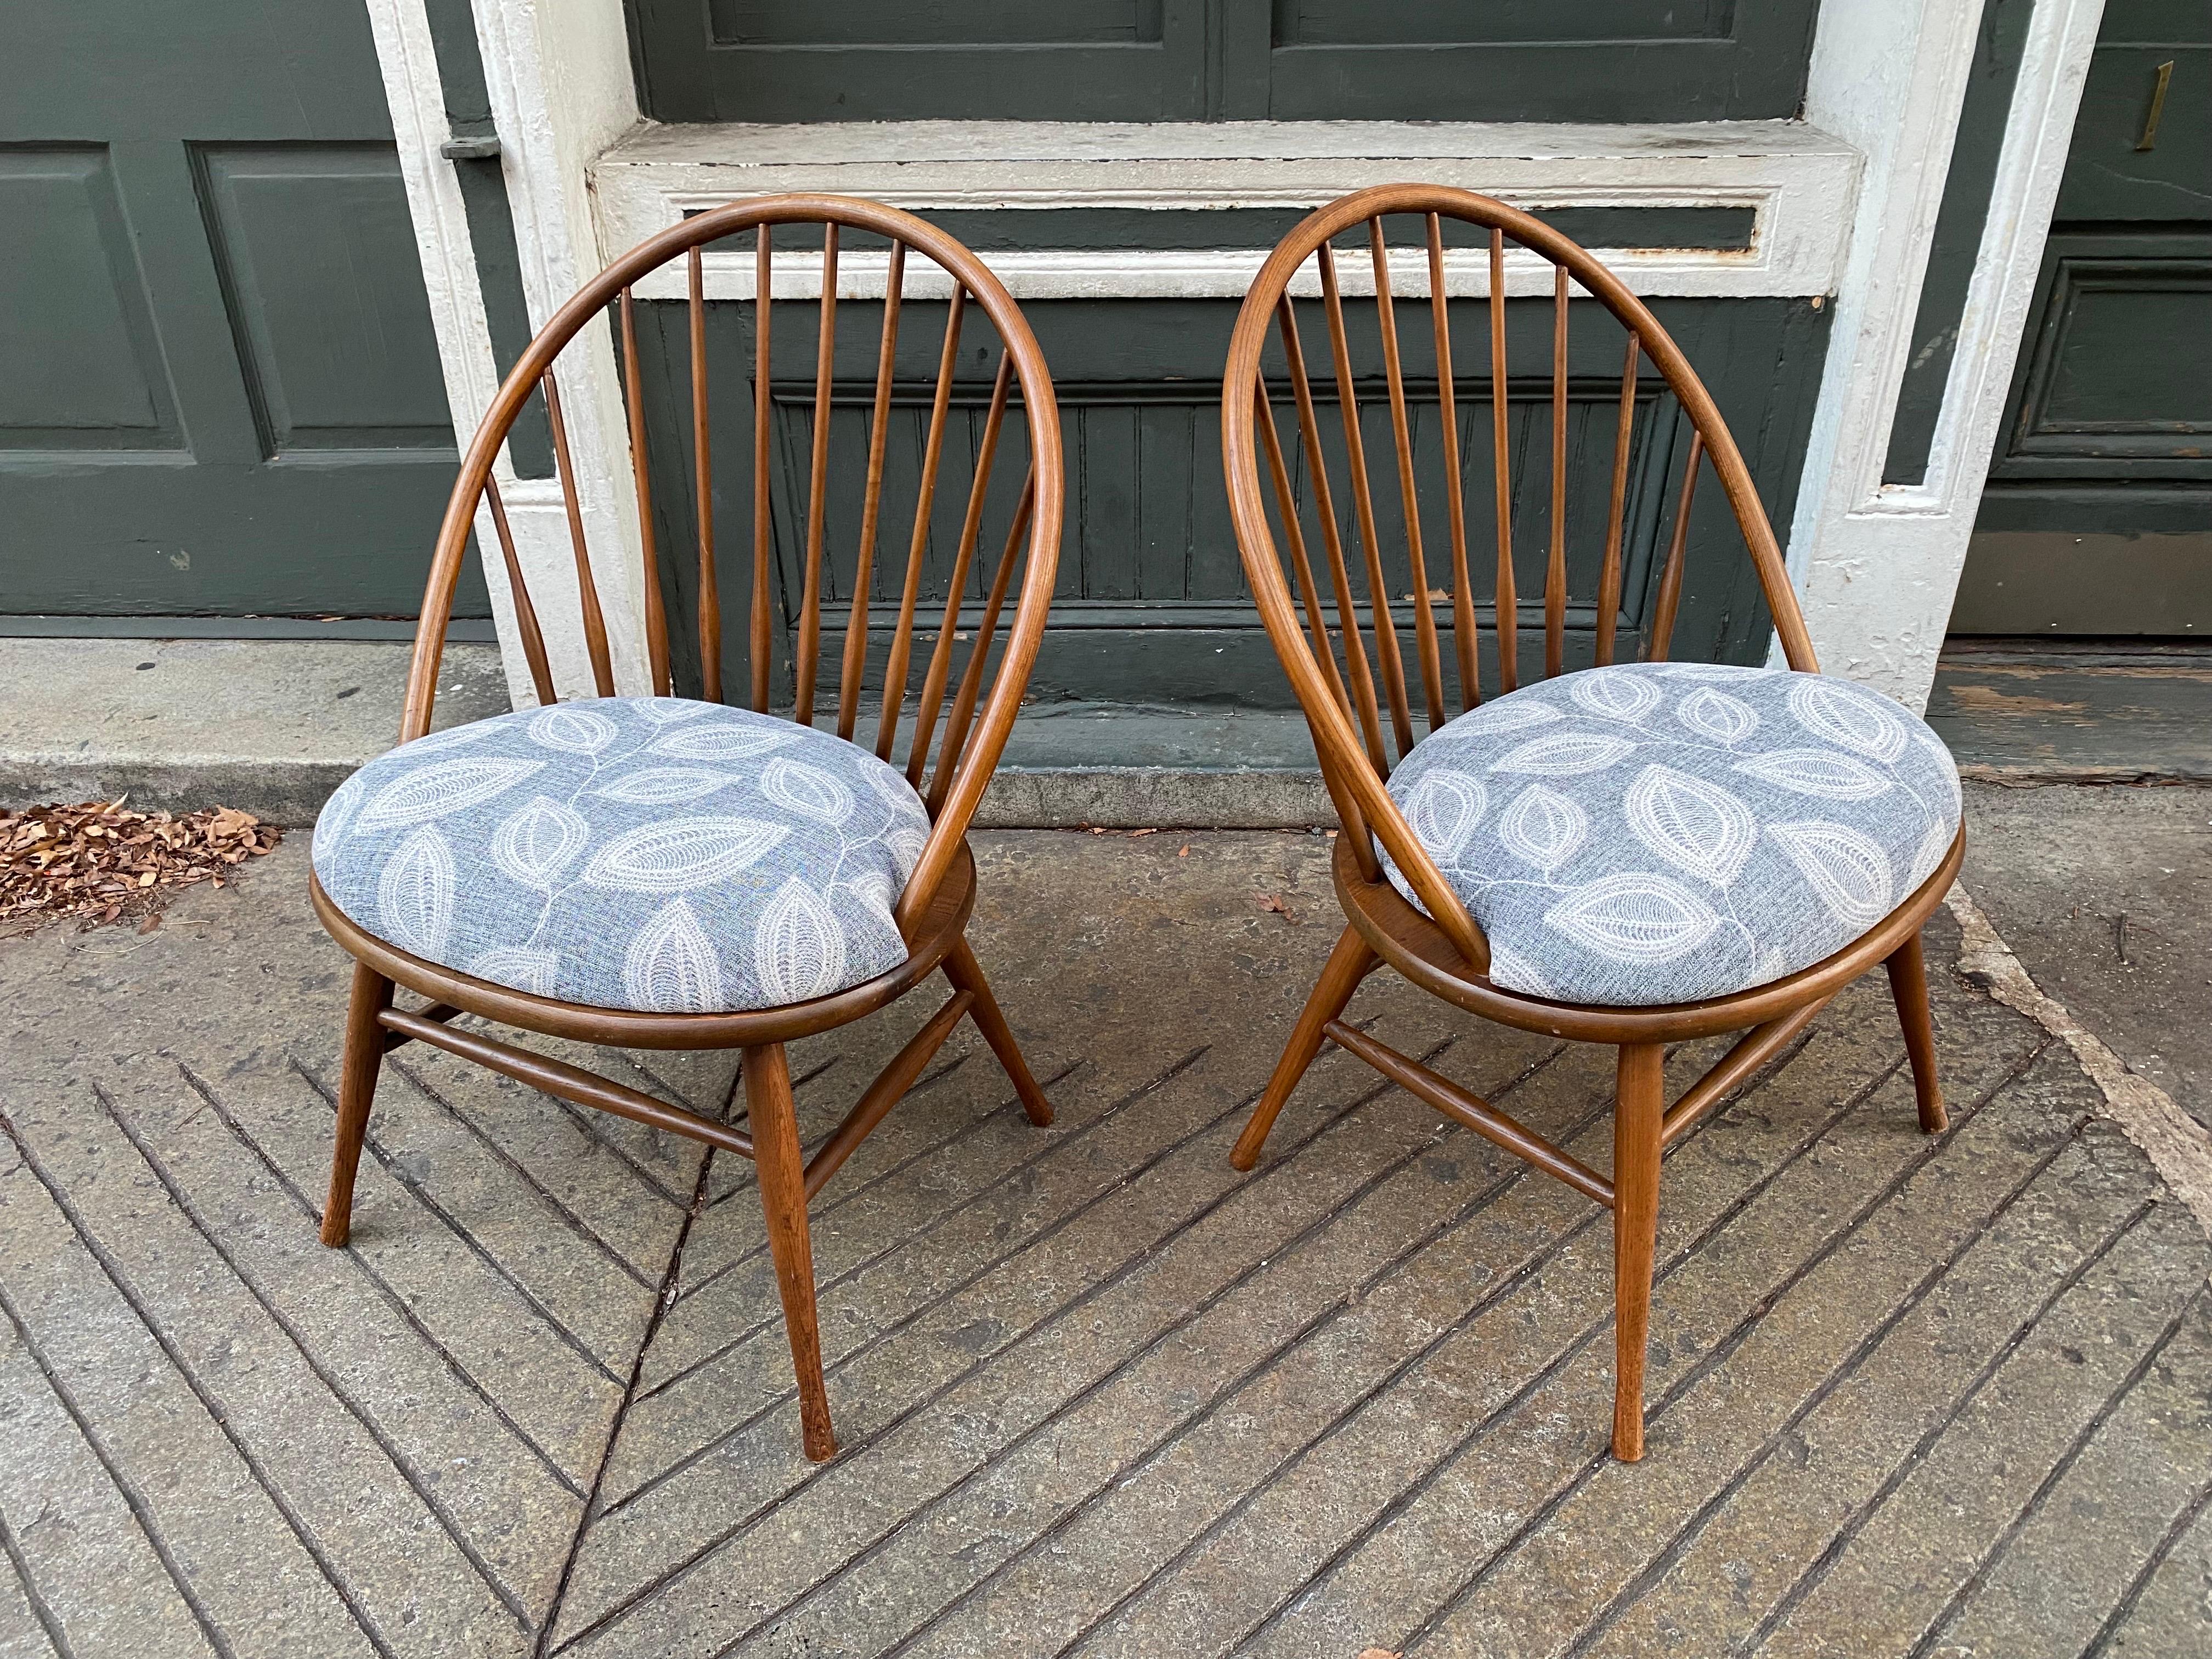 Pair of Heywood Wakefield Danish Inspired Lounge Chairs.  Newly upholstered seat cushions!  Very comfortable with a small footprint.  Curved bentwood back done in a modern way!